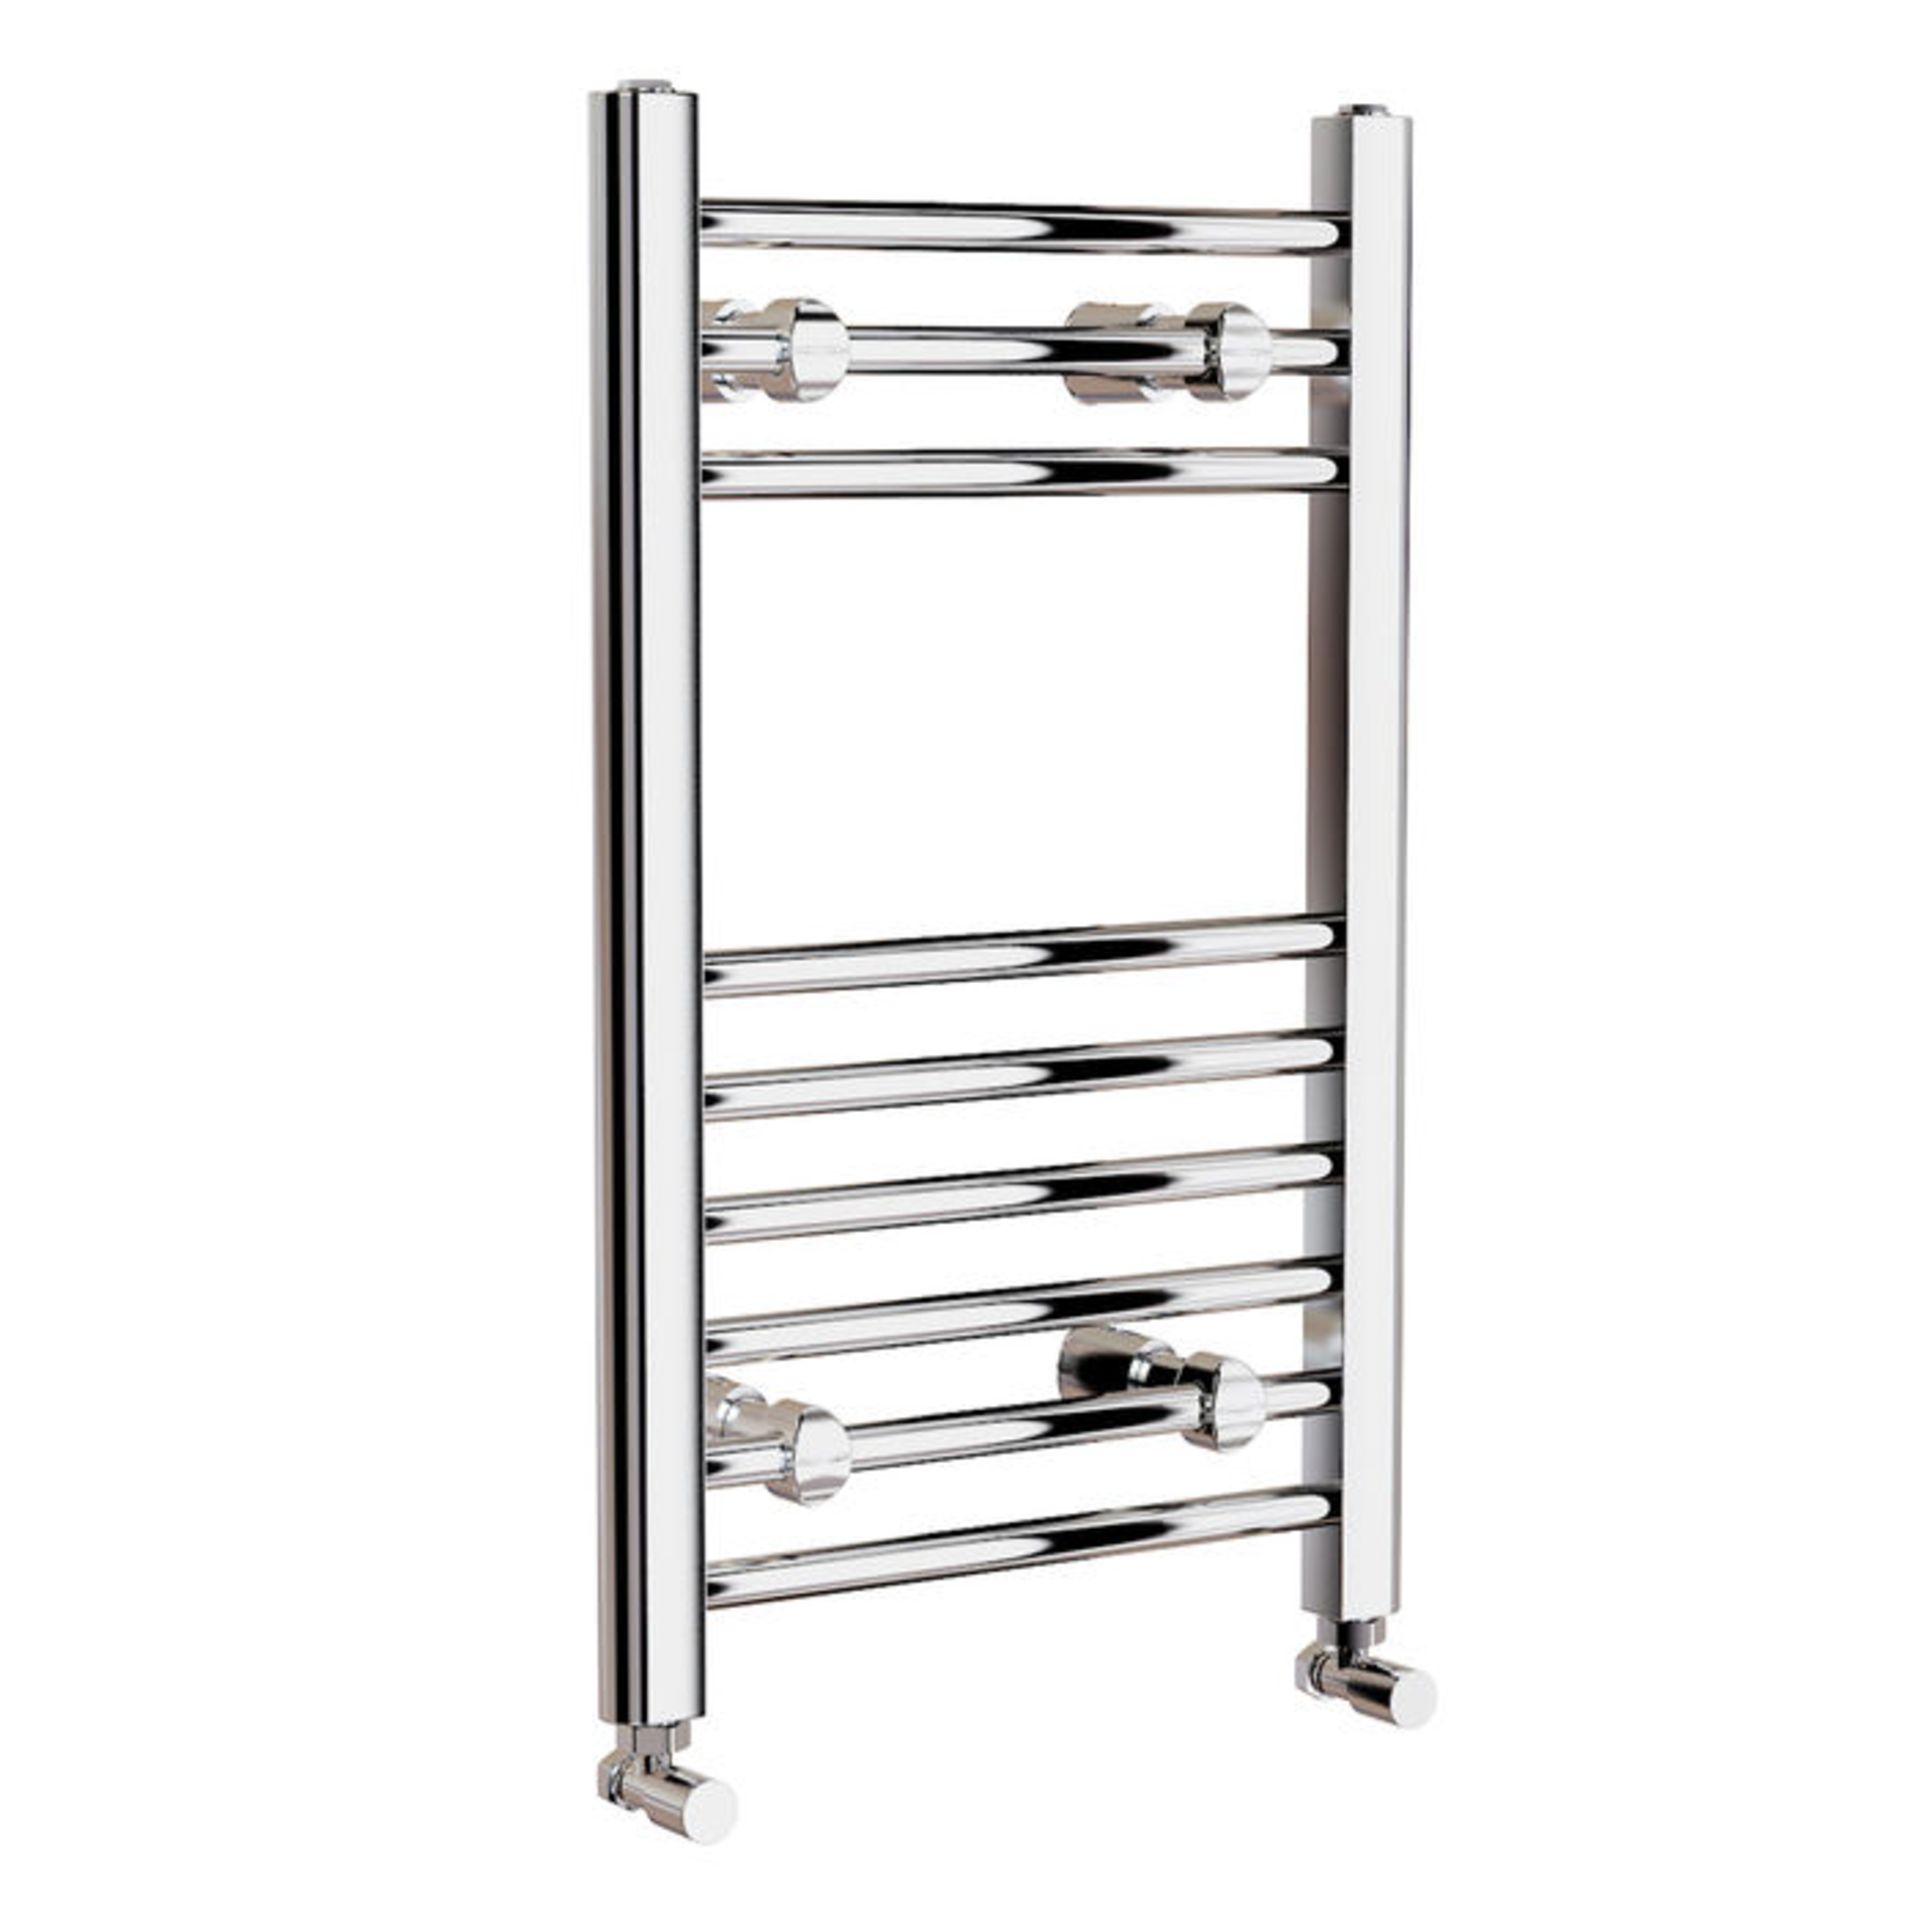 (H43) 650x400mm - Basic 20mm Tubes - Chrome Heated Straight Rail Ladder Towel Radiator Low carbon - Image 3 of 3